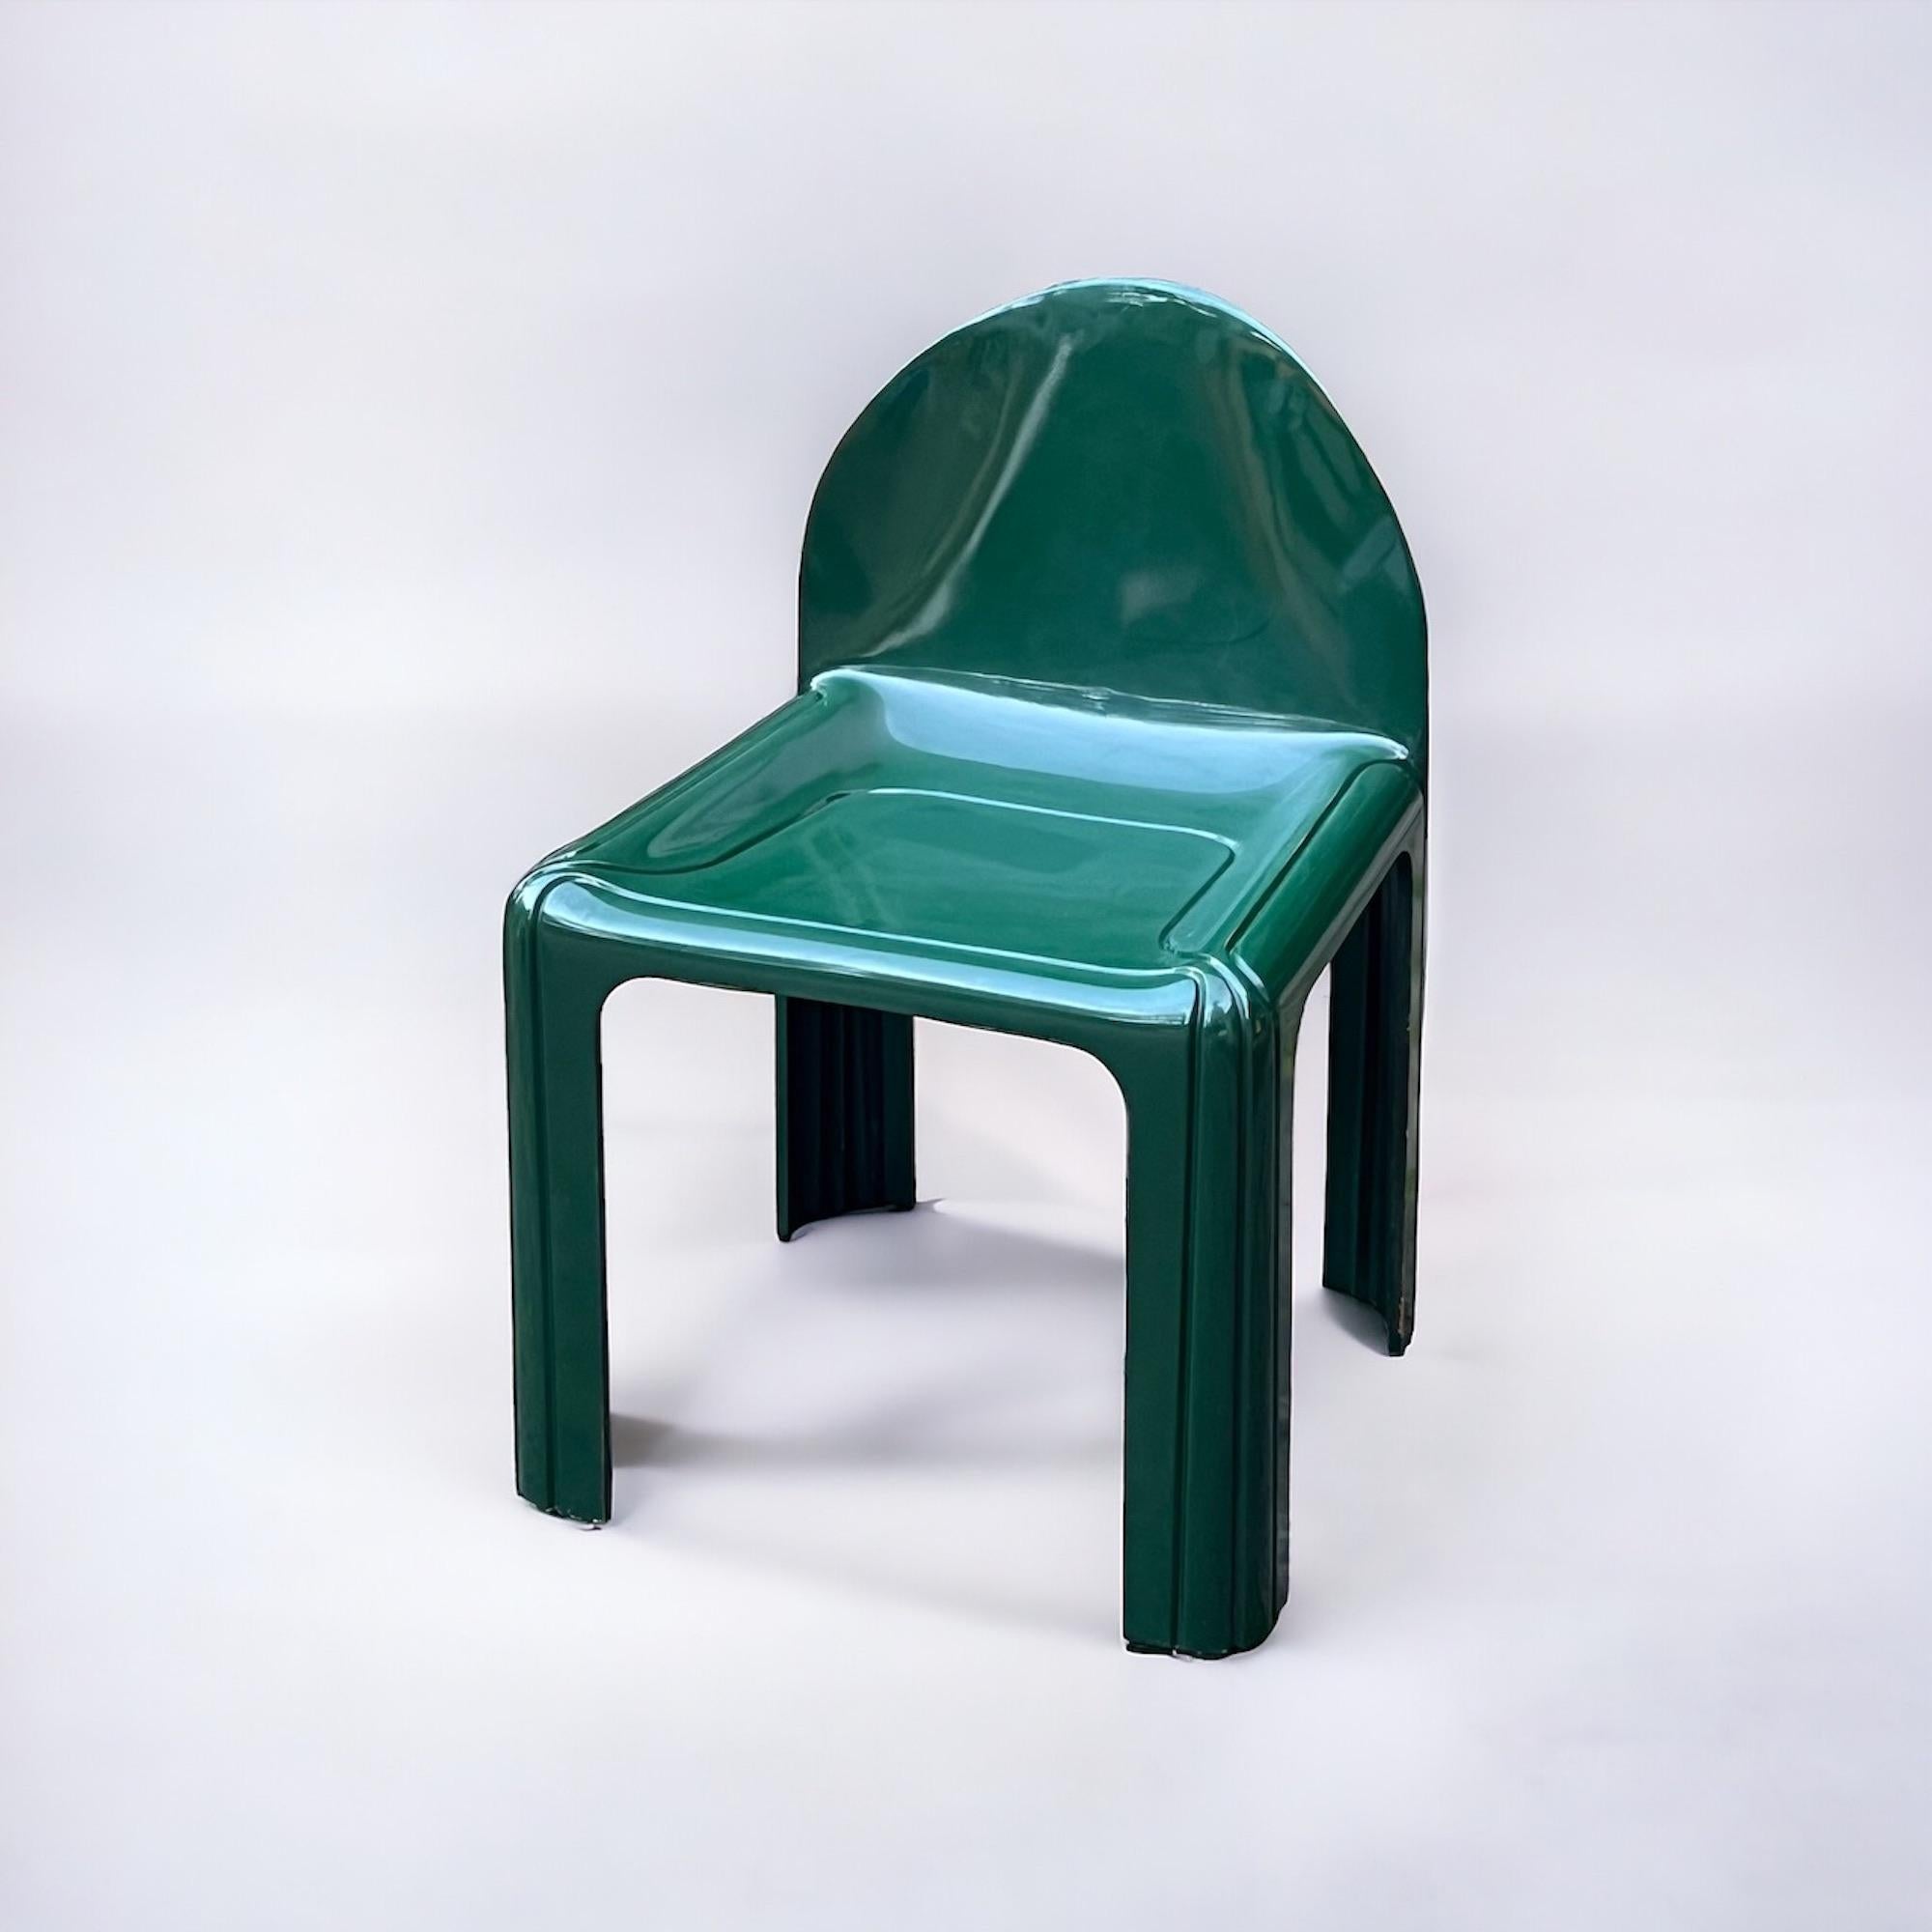 Mid-Century Modern Kartell Model 4854 Chairs by Gae Aulenti, 1960s - Set of 4 - Emerald Green Resin